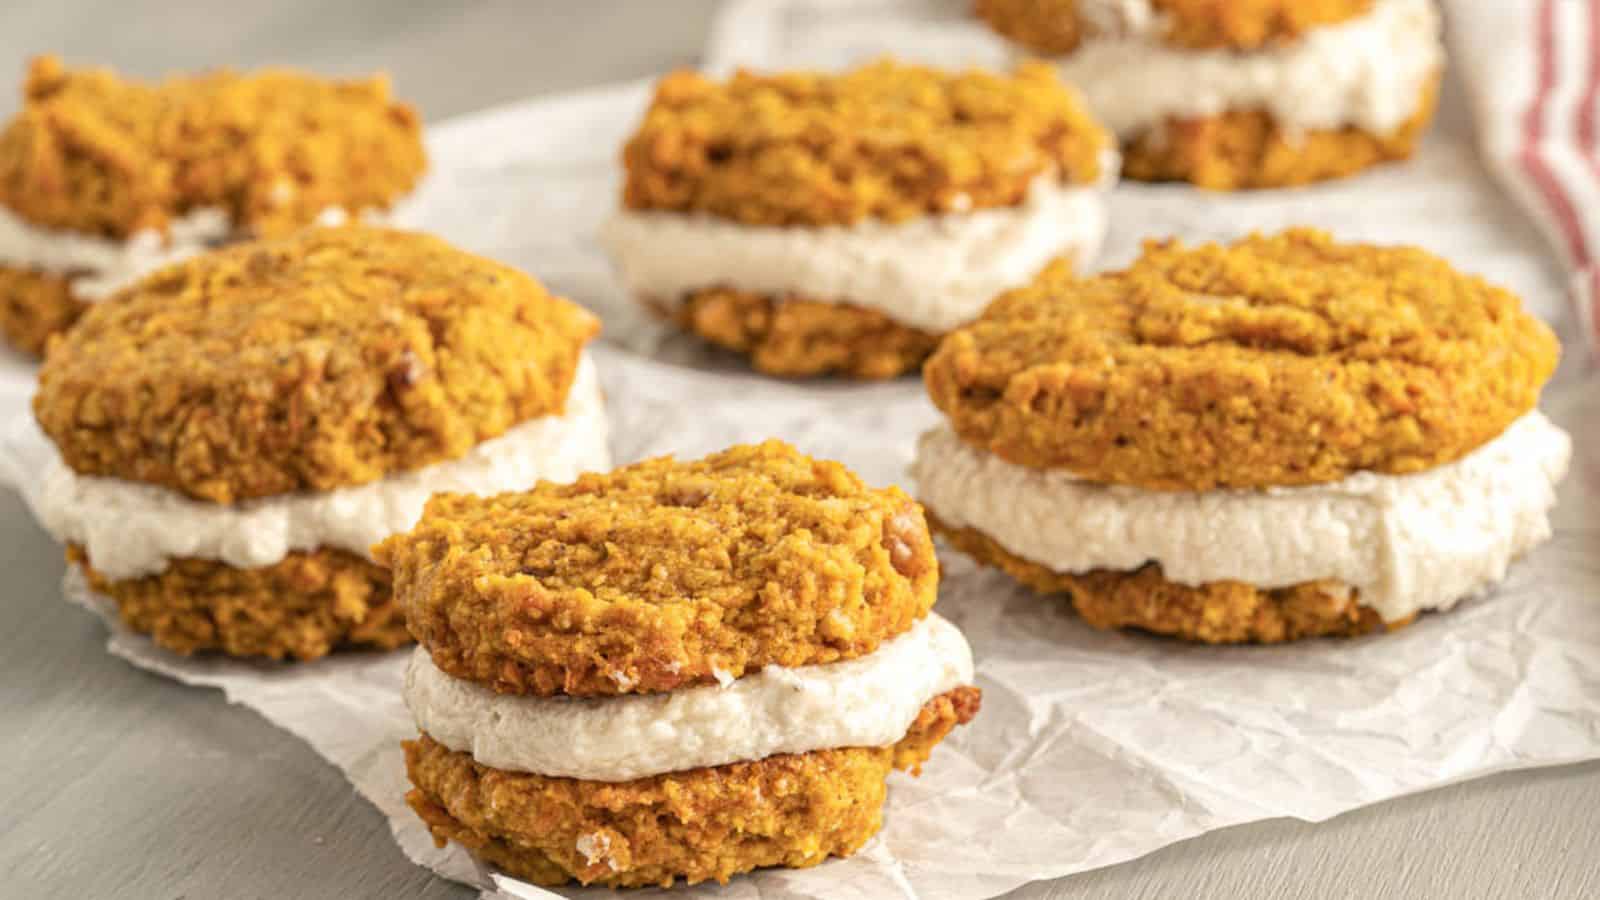 <p>Want to indulge in the flavors of carrot cake without the hassle of baking a whole cake? Our carrot cake cookies are the answer! Whether you’re enjoying them with a cup of tea or sharing them with friends, these cookies are sure to be a hit.<br><strong>Get the Recipe: </strong><a href="https://twocityvegans.com/vegan-carrot-cake-cookies/?utm_source=msn&utm_medium=page&utm_campaign=msn">Carrot Cake Cookies with Cream Cheese Frosting</a></p>